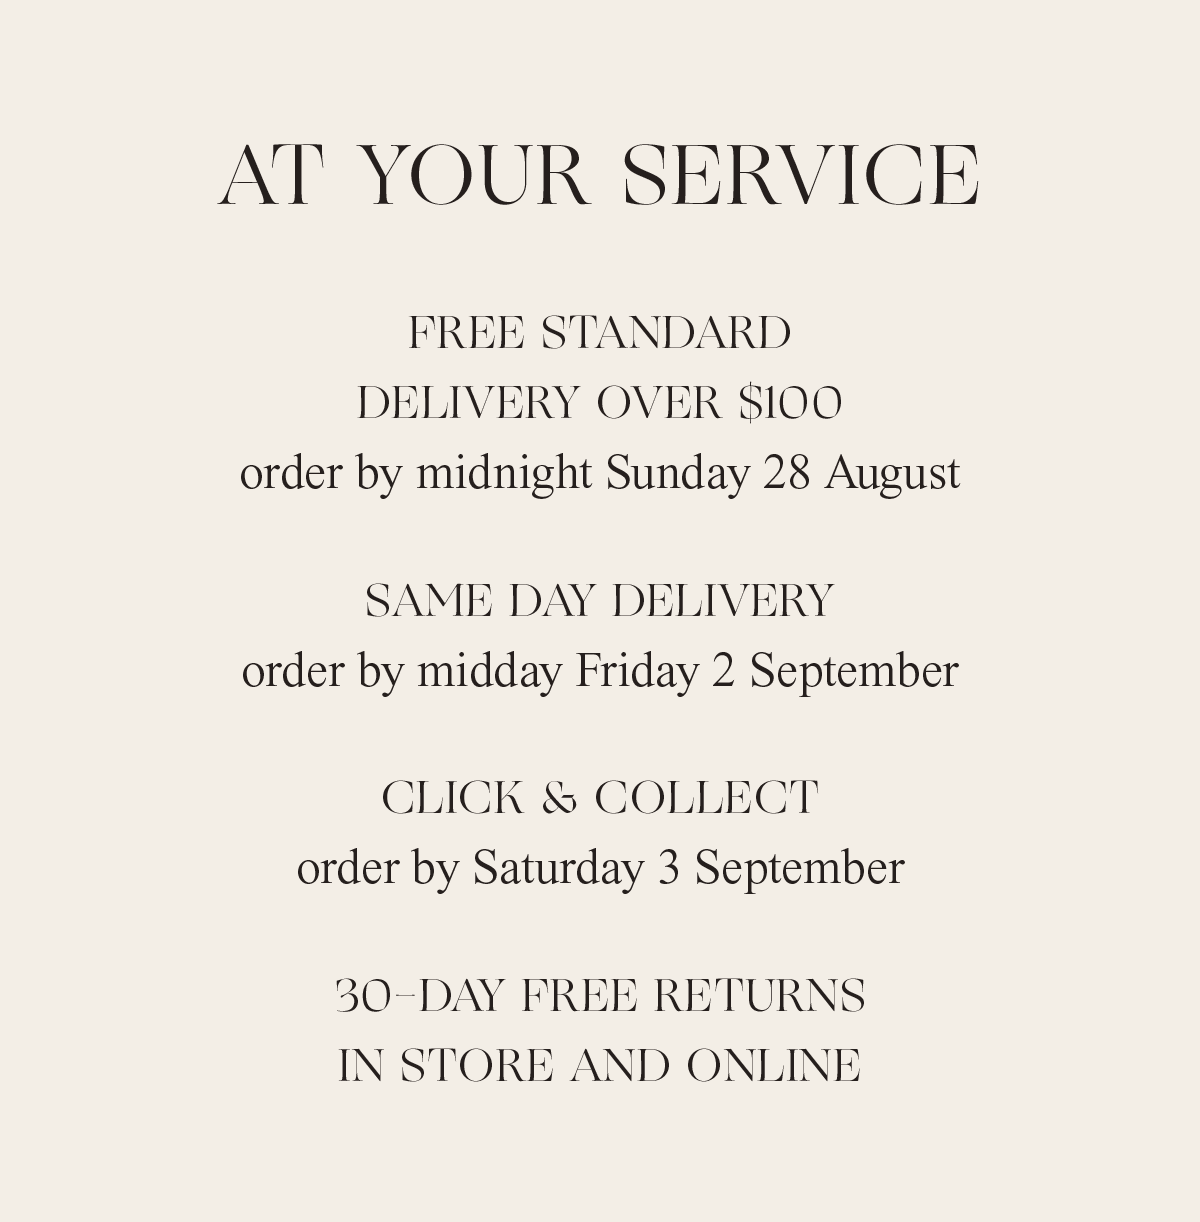 AT YOUR SERVICE | FREE STANDARD DELIVERY OVER $100 order by midnight Sunday 28 August | CLICK & COLLECT order by Saturday 3 September | SAME DAY DELIVERY order by Saturday 3 September | 30-DAY FREE RETURNS IN STORE AND ONLINE